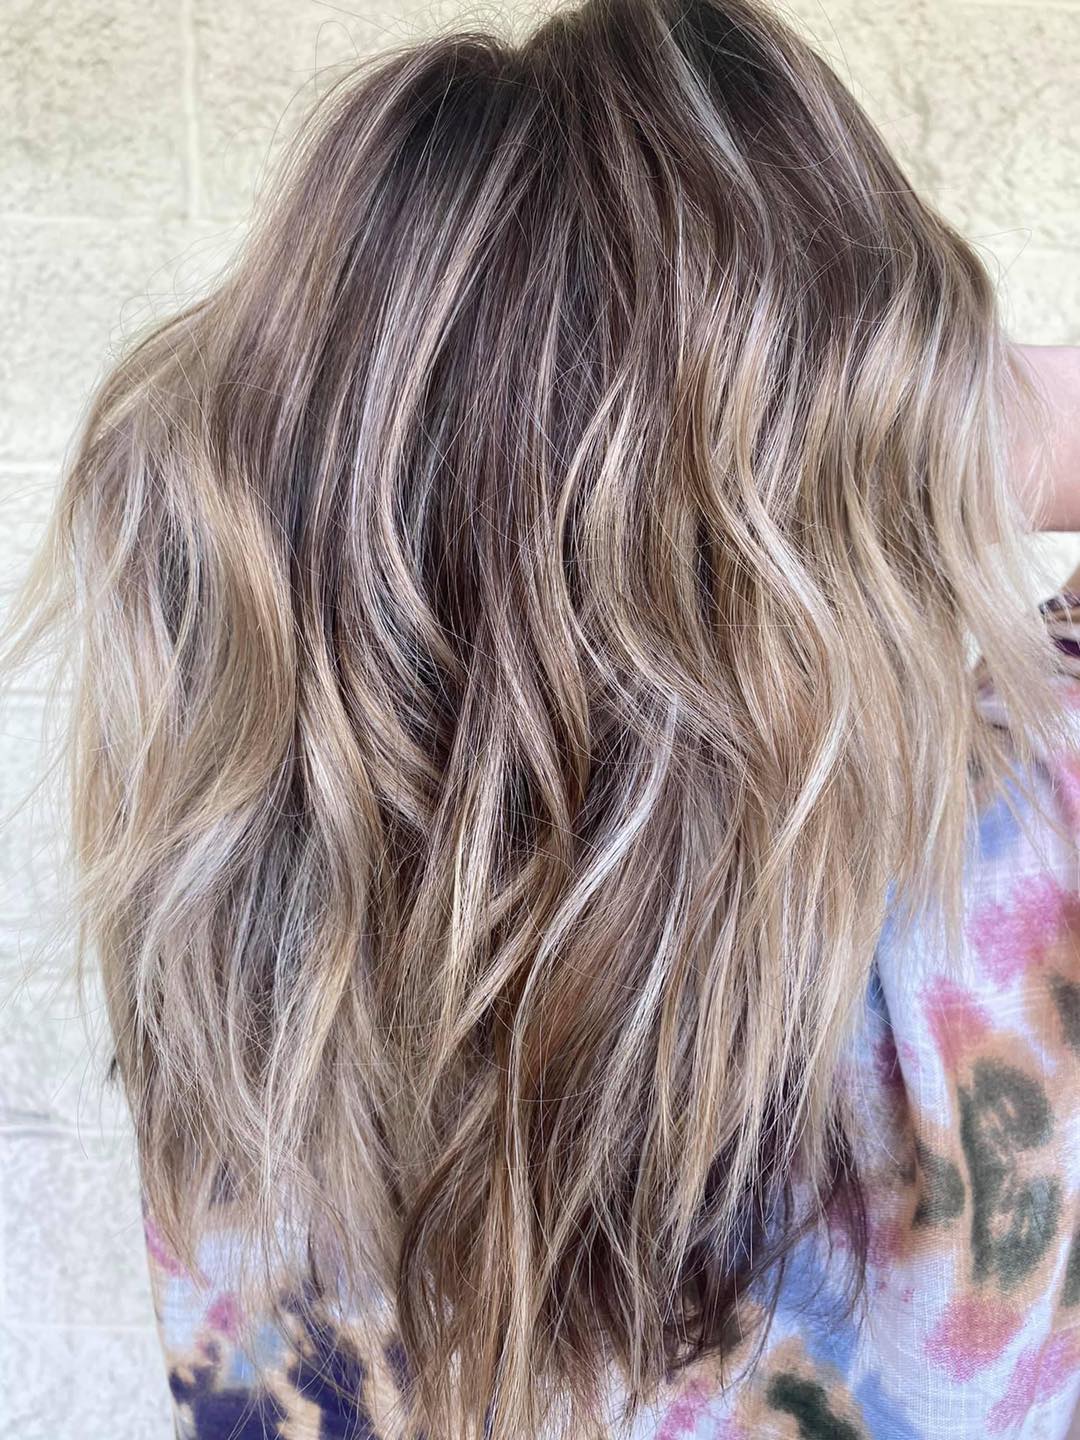 Hair Coloring Service Gallery | Balayage Highlights | Ombre | Vibrant Red  and Rose Gold Hair Colors | Signature Salon & Spa Waukesha, Wisconsin 53189